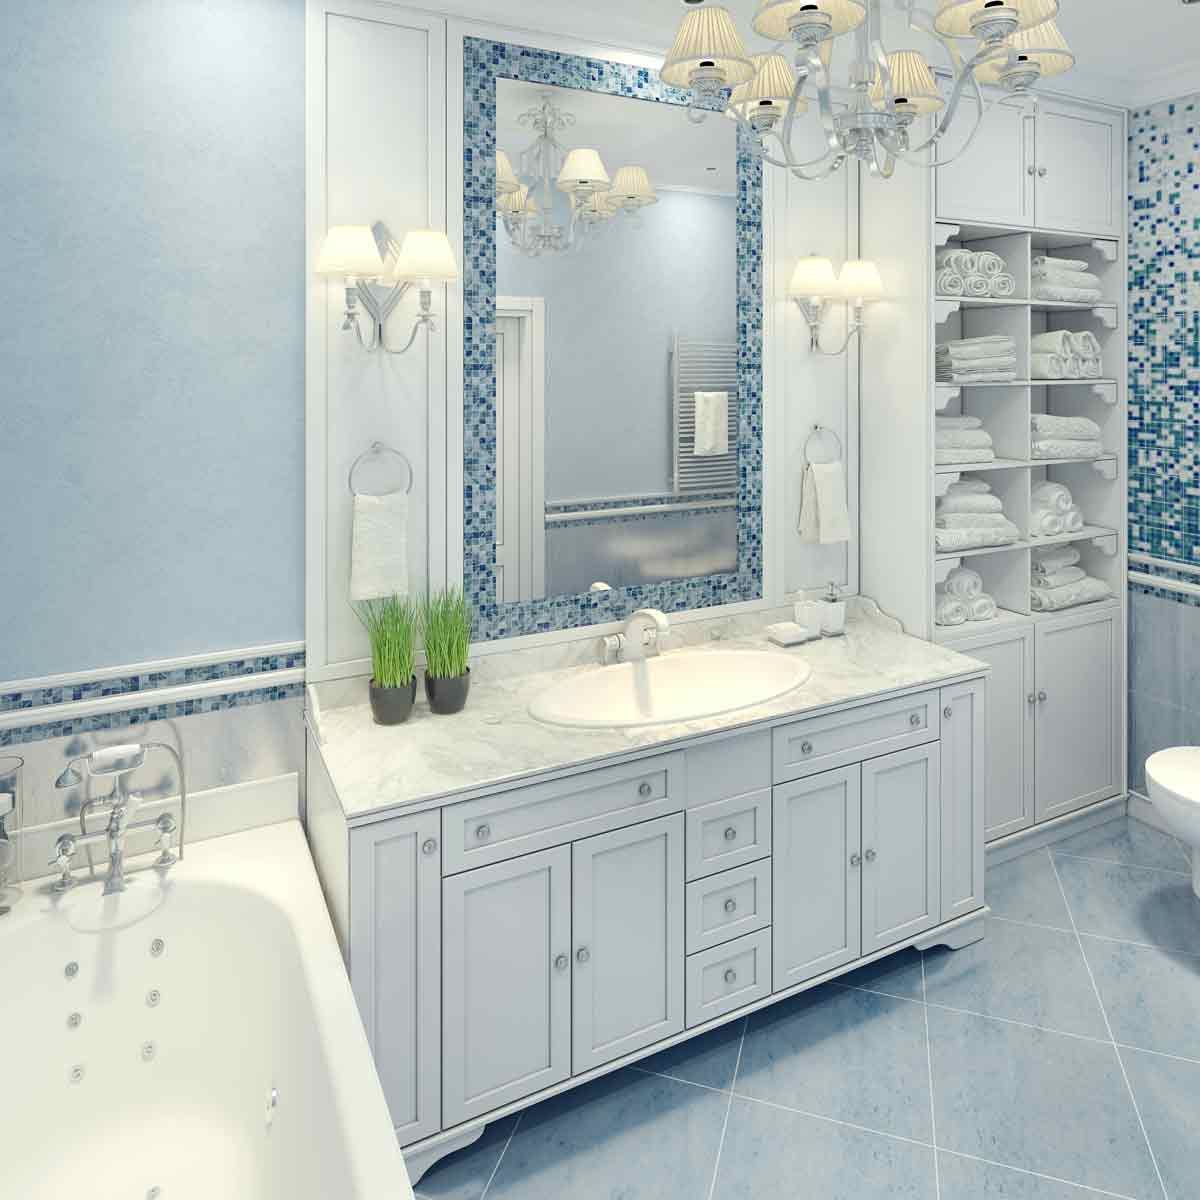 Bright-art-deco-bathroom-interior-The-spacious-bathroom-with-white-furniture-and-fragments-of-mosaic-wall